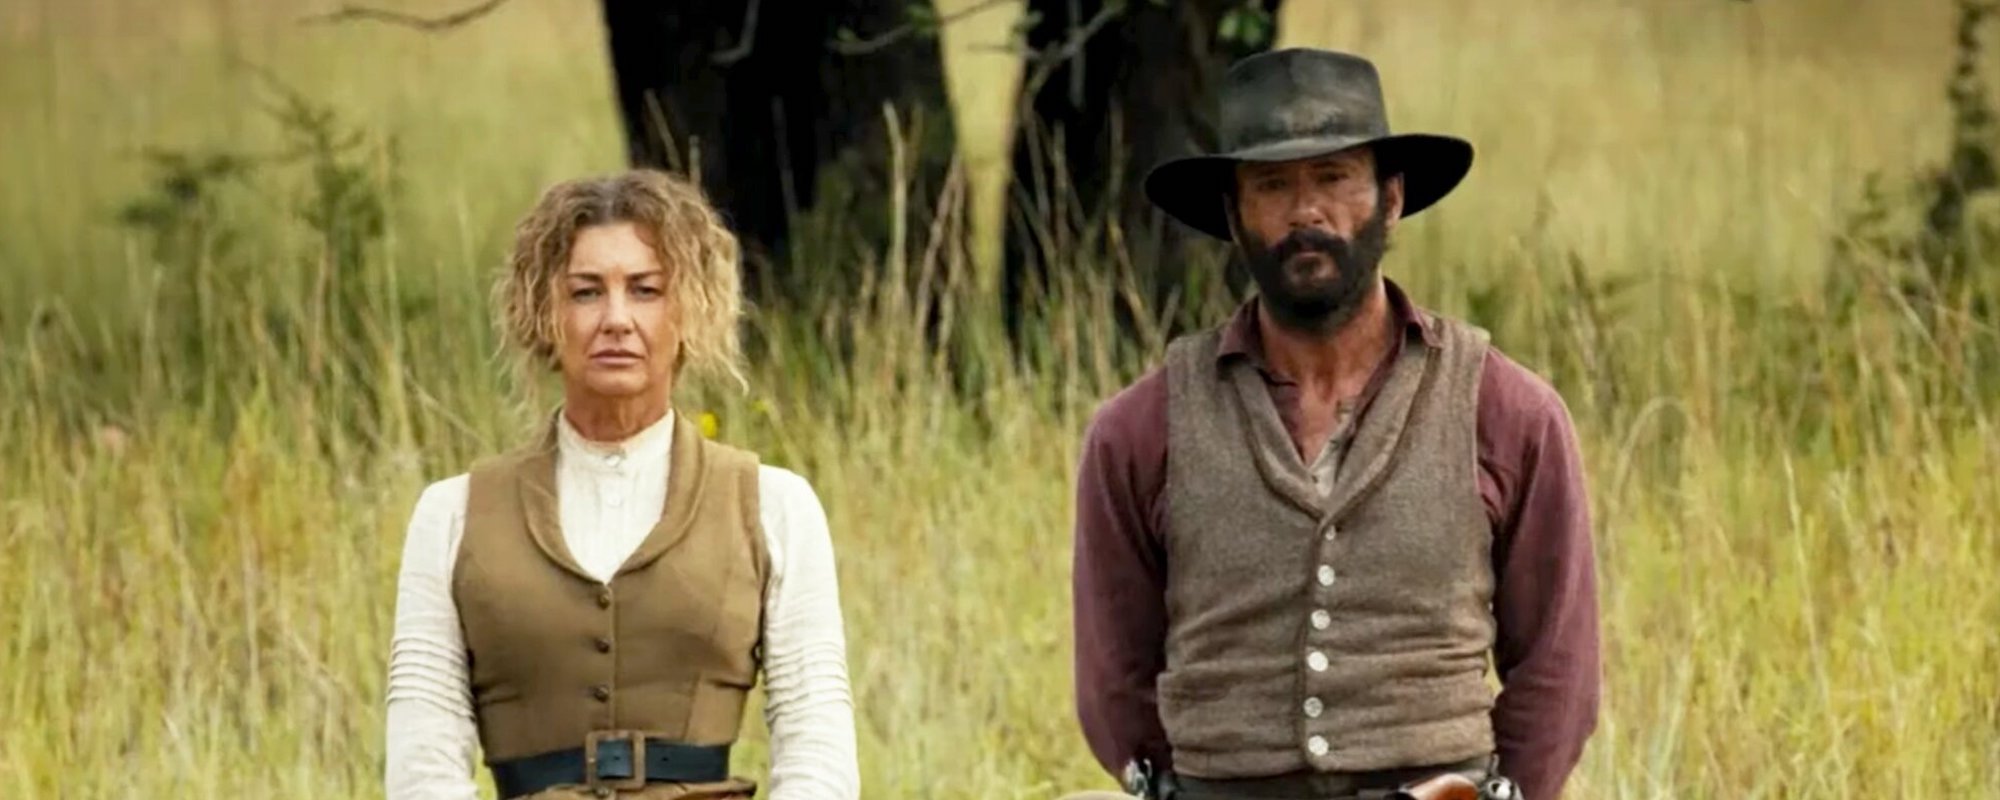 Tim McGraw, Faith Hill Revealed in Trailer for ‘Yellowstone’ Prequel ‘1883’